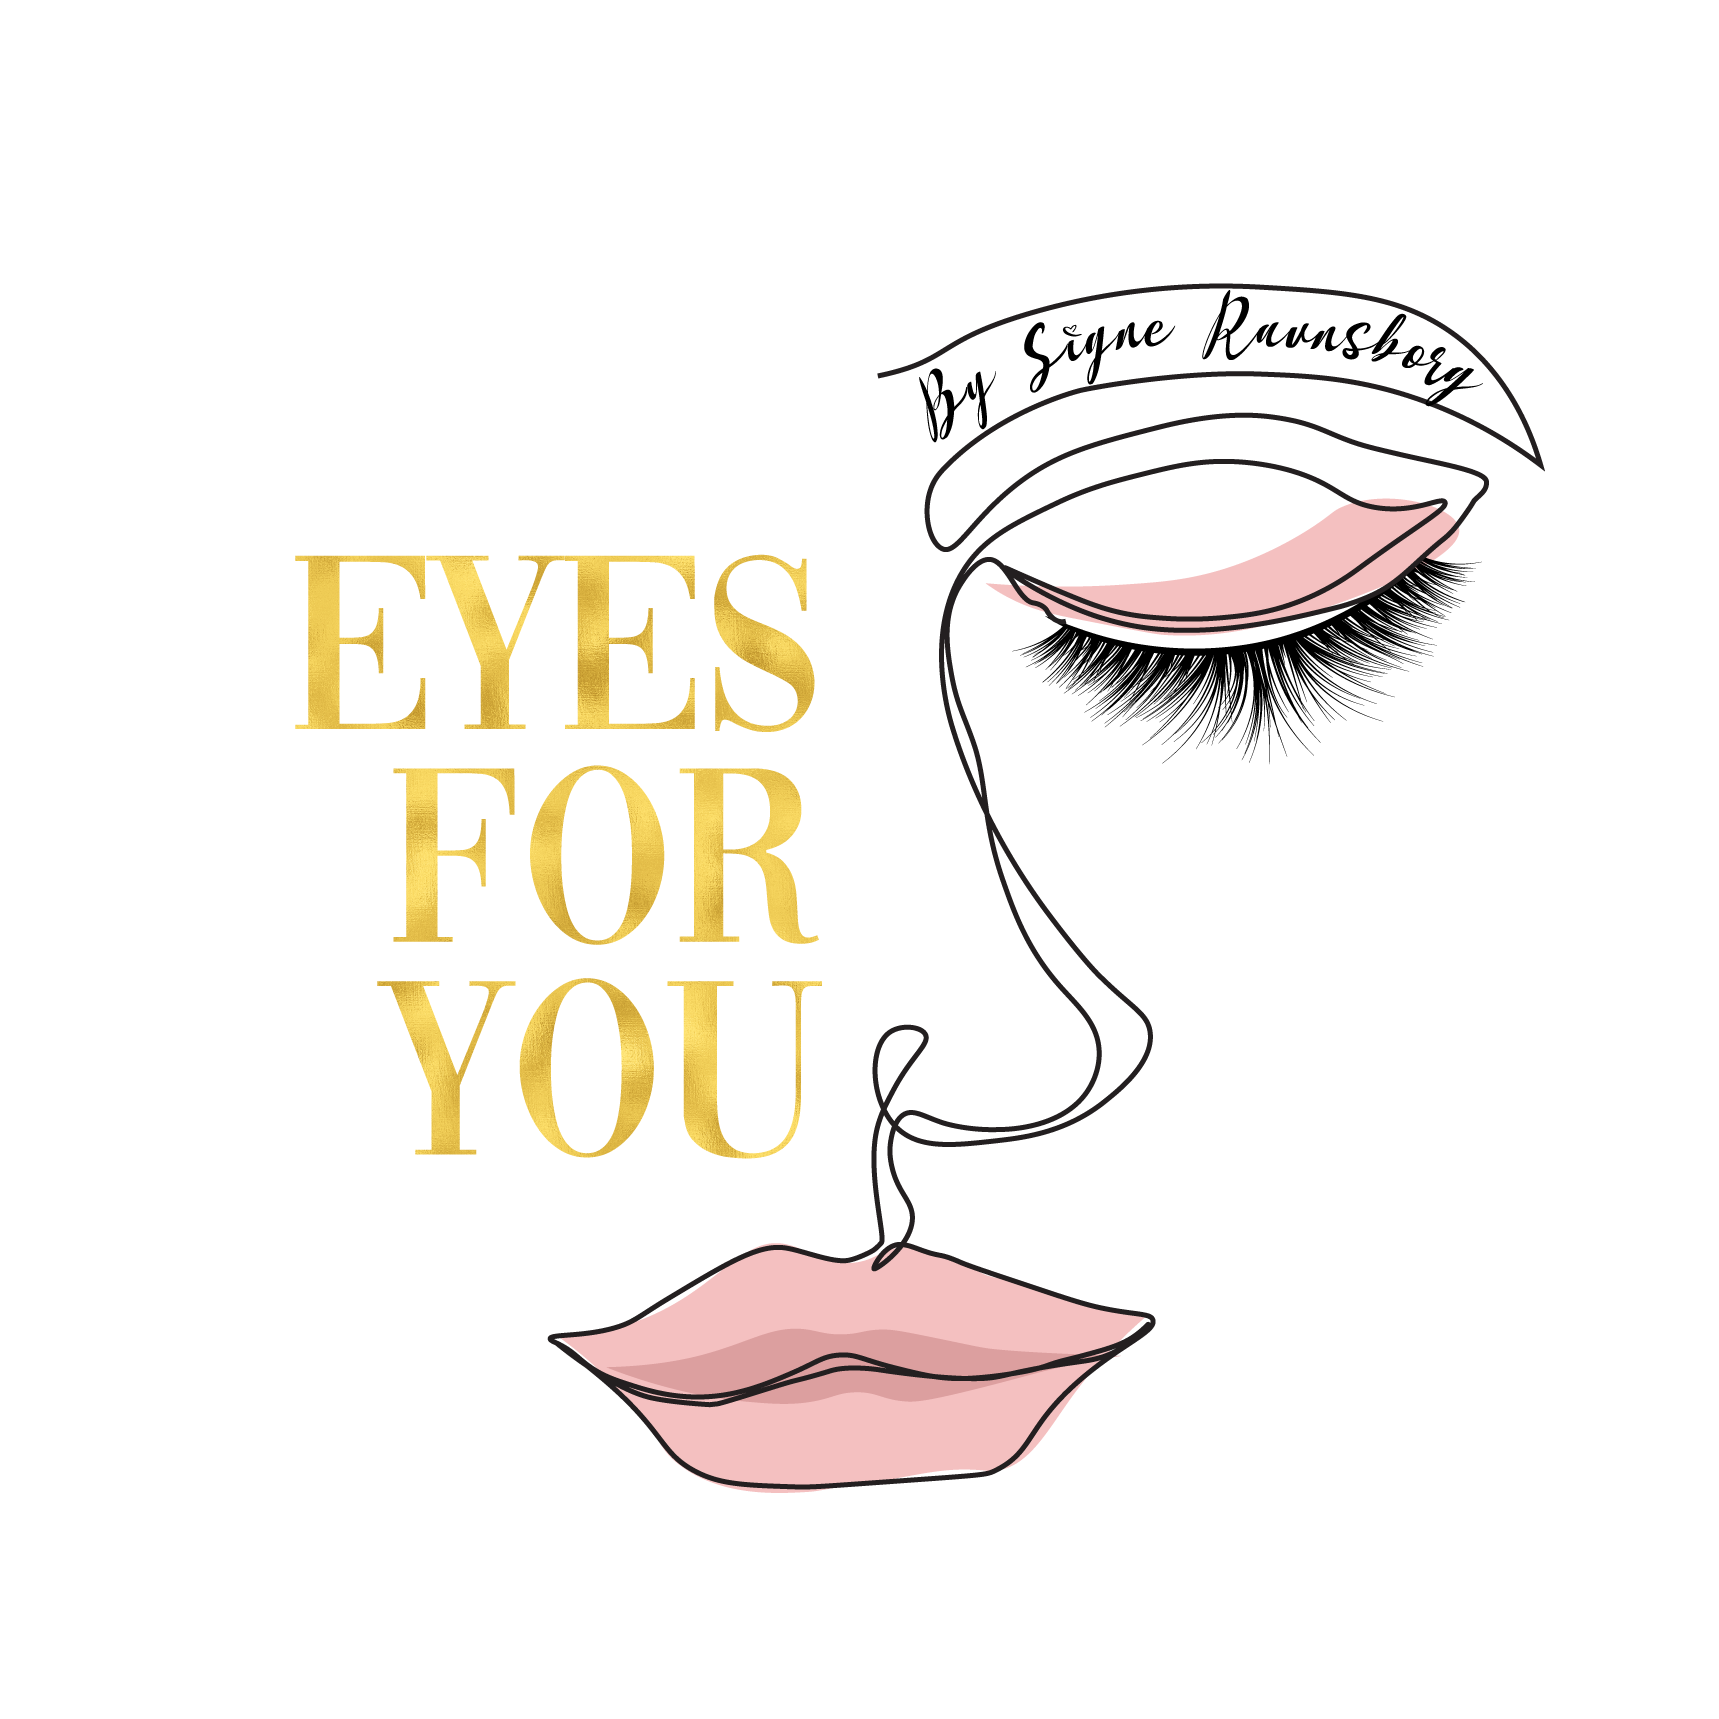 EYES FOR YOU